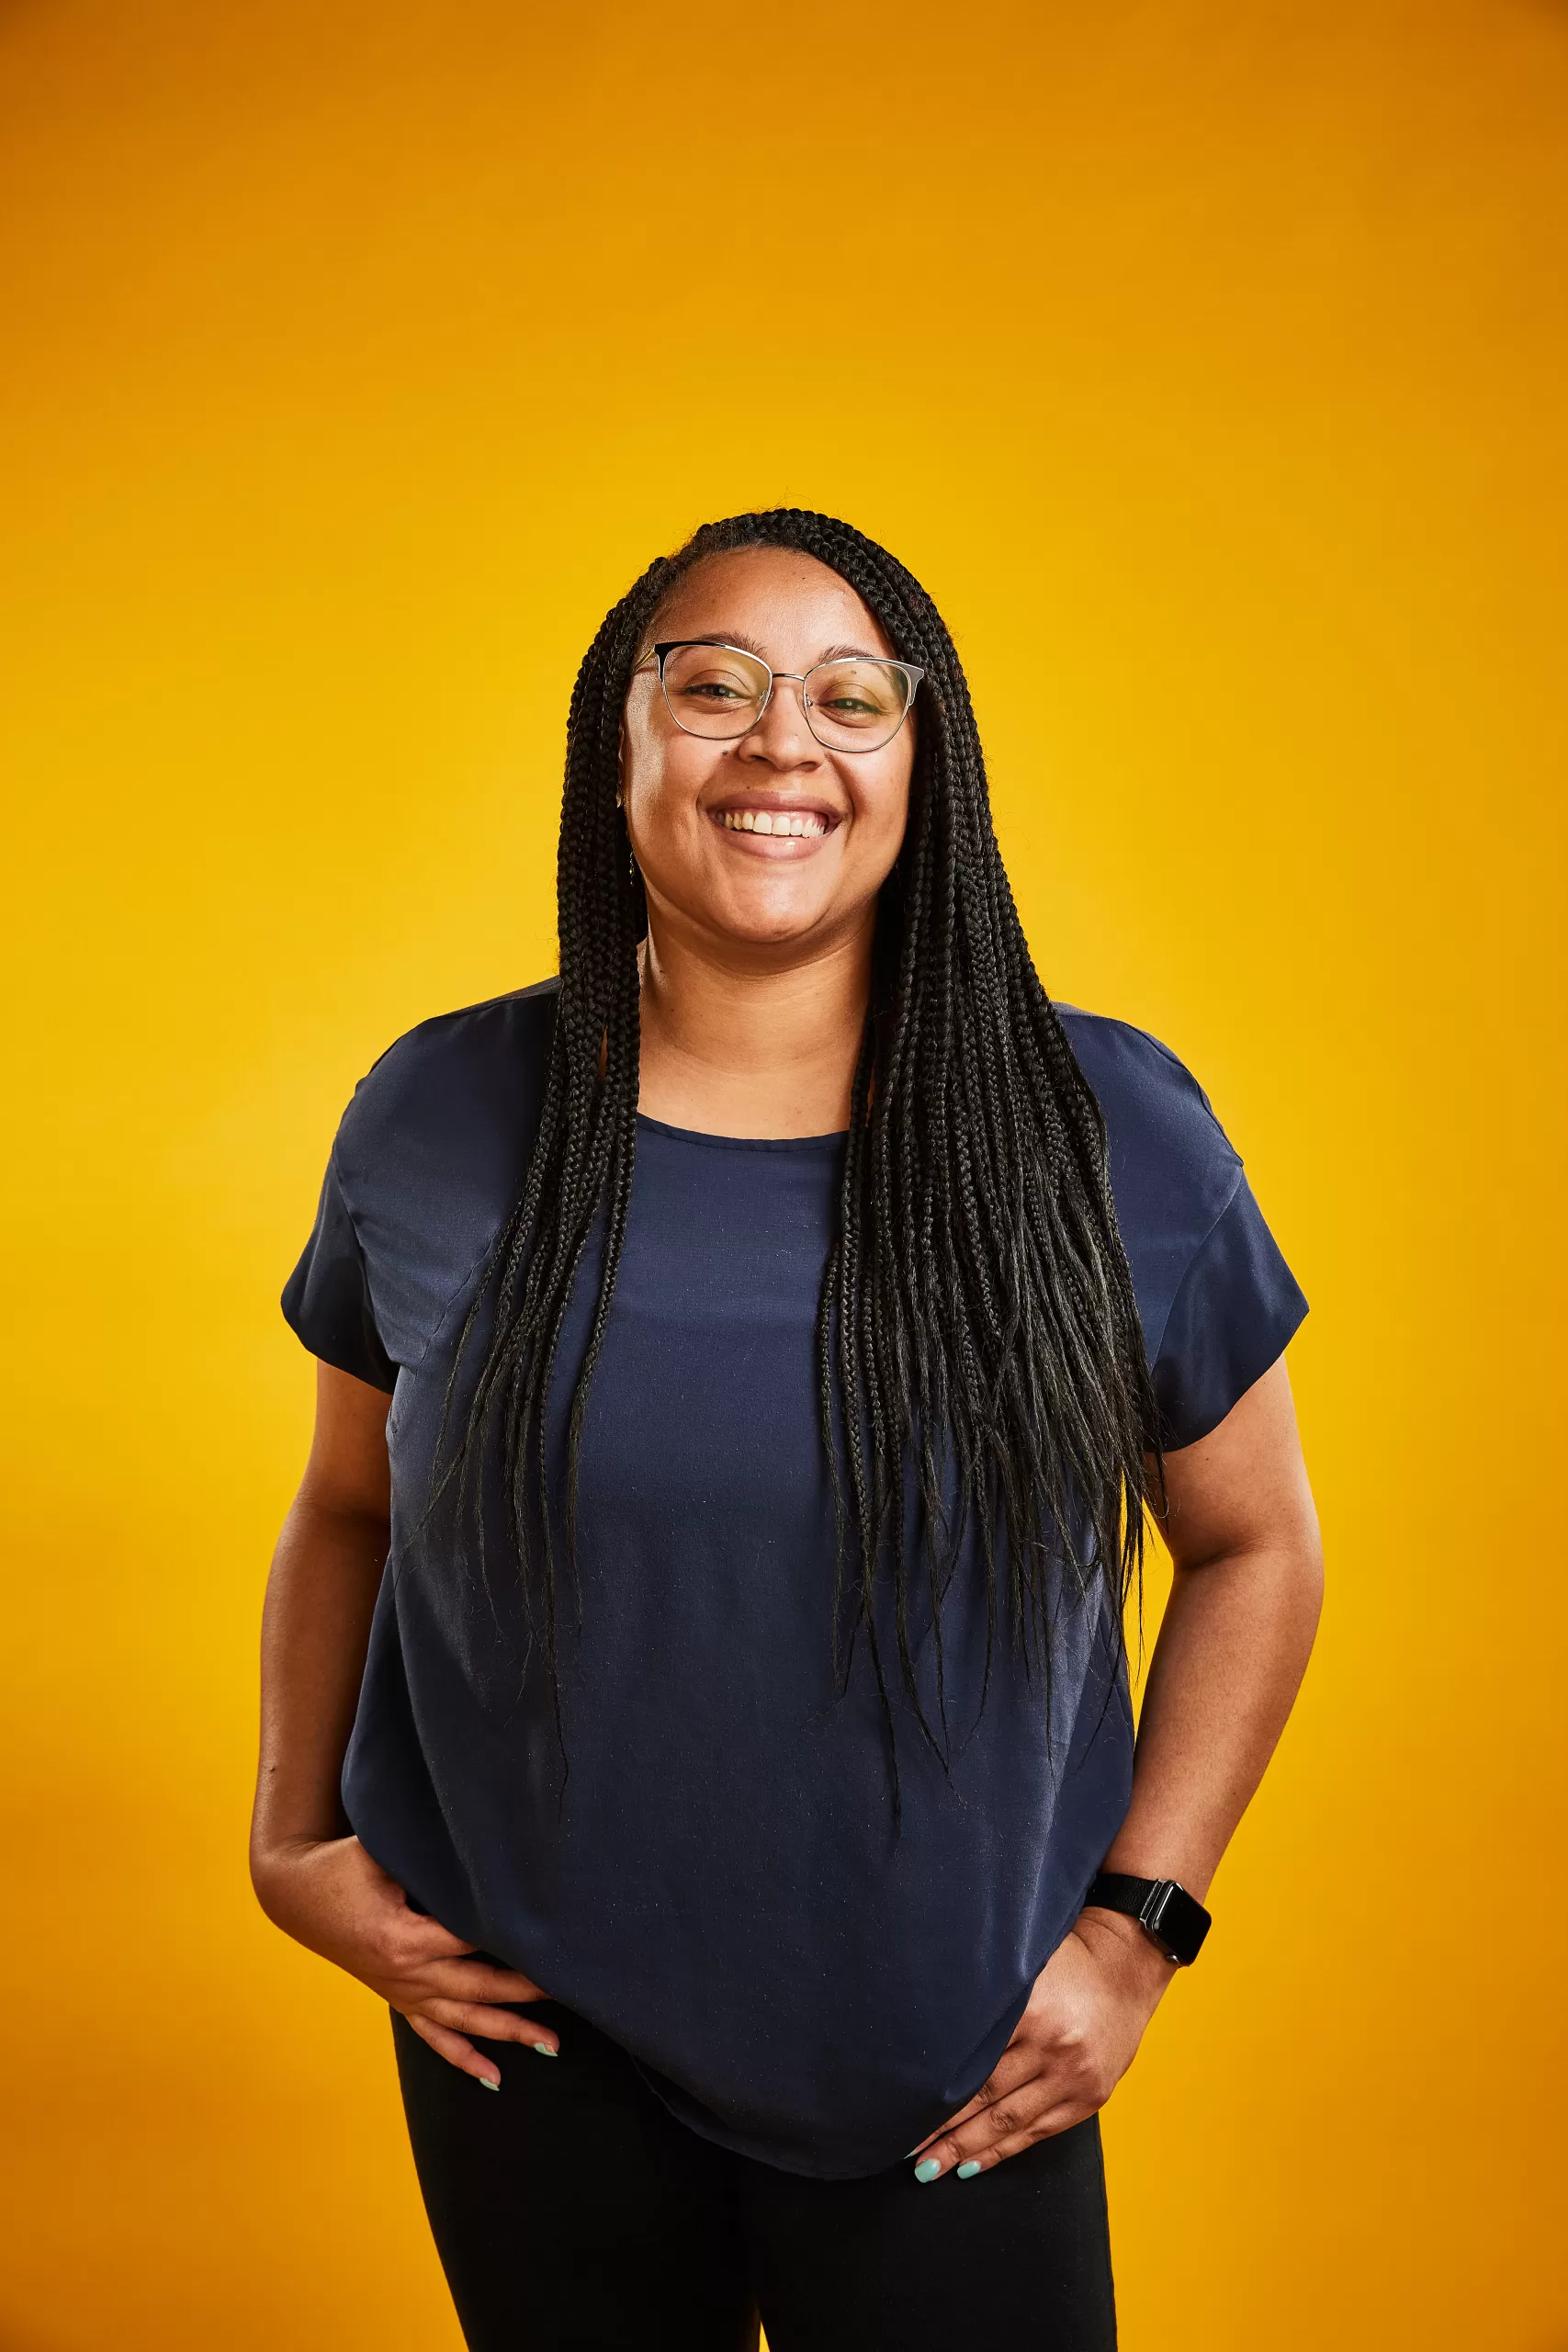 A young woman with braided hair, wearing a blue shirt, smiles to the camera in front of a yellow background.